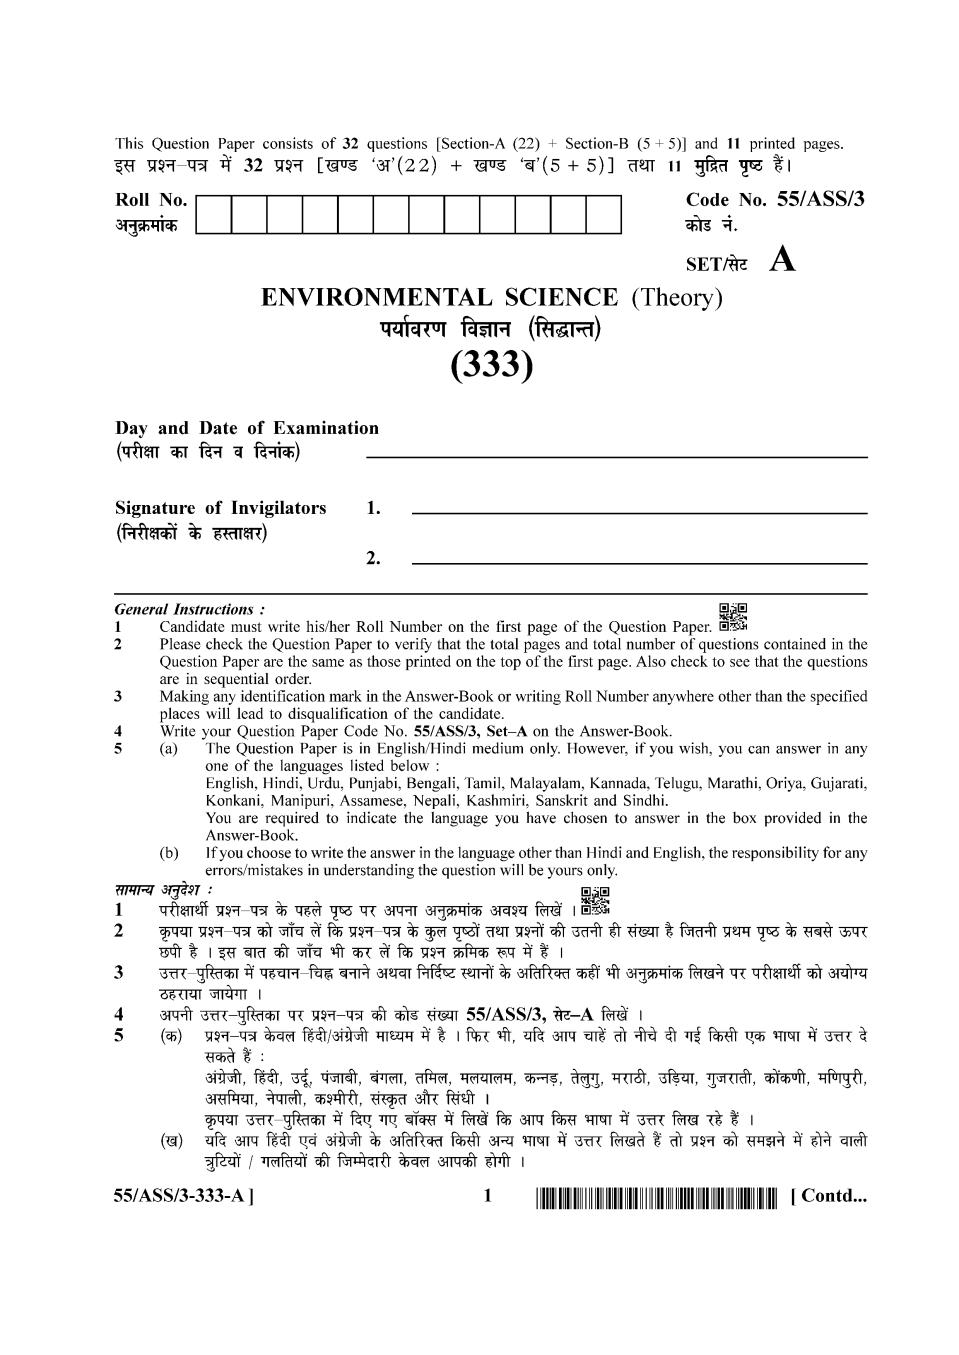 NIOS Class 12 Question Paper Oct 2017 - Environmental Science - Page 1